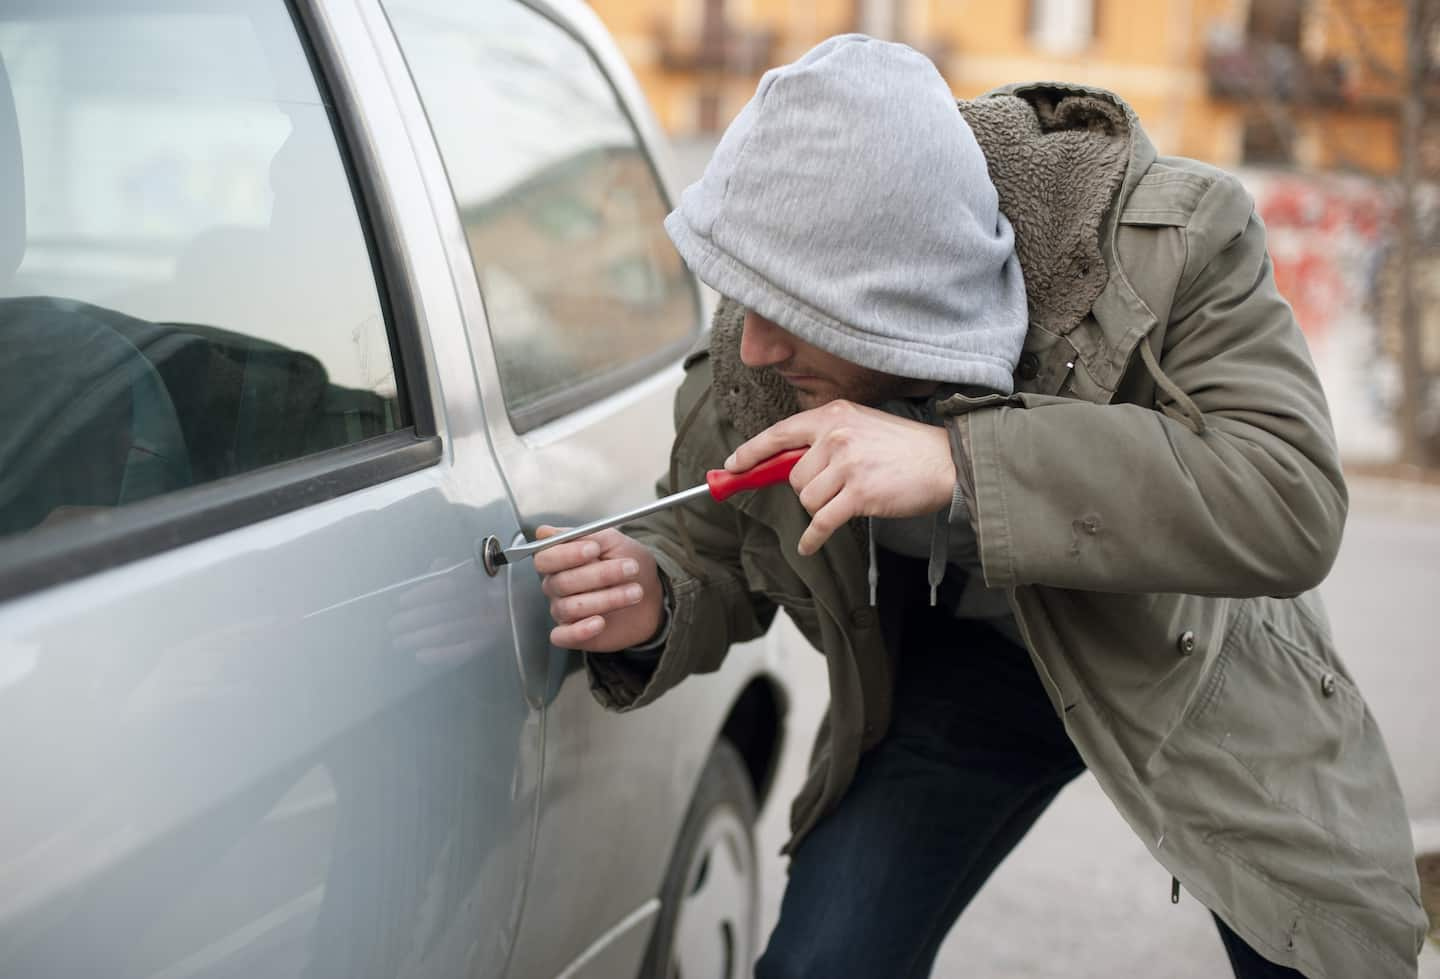 Vehicle theft: Ottawa must act, says Toronto elected official